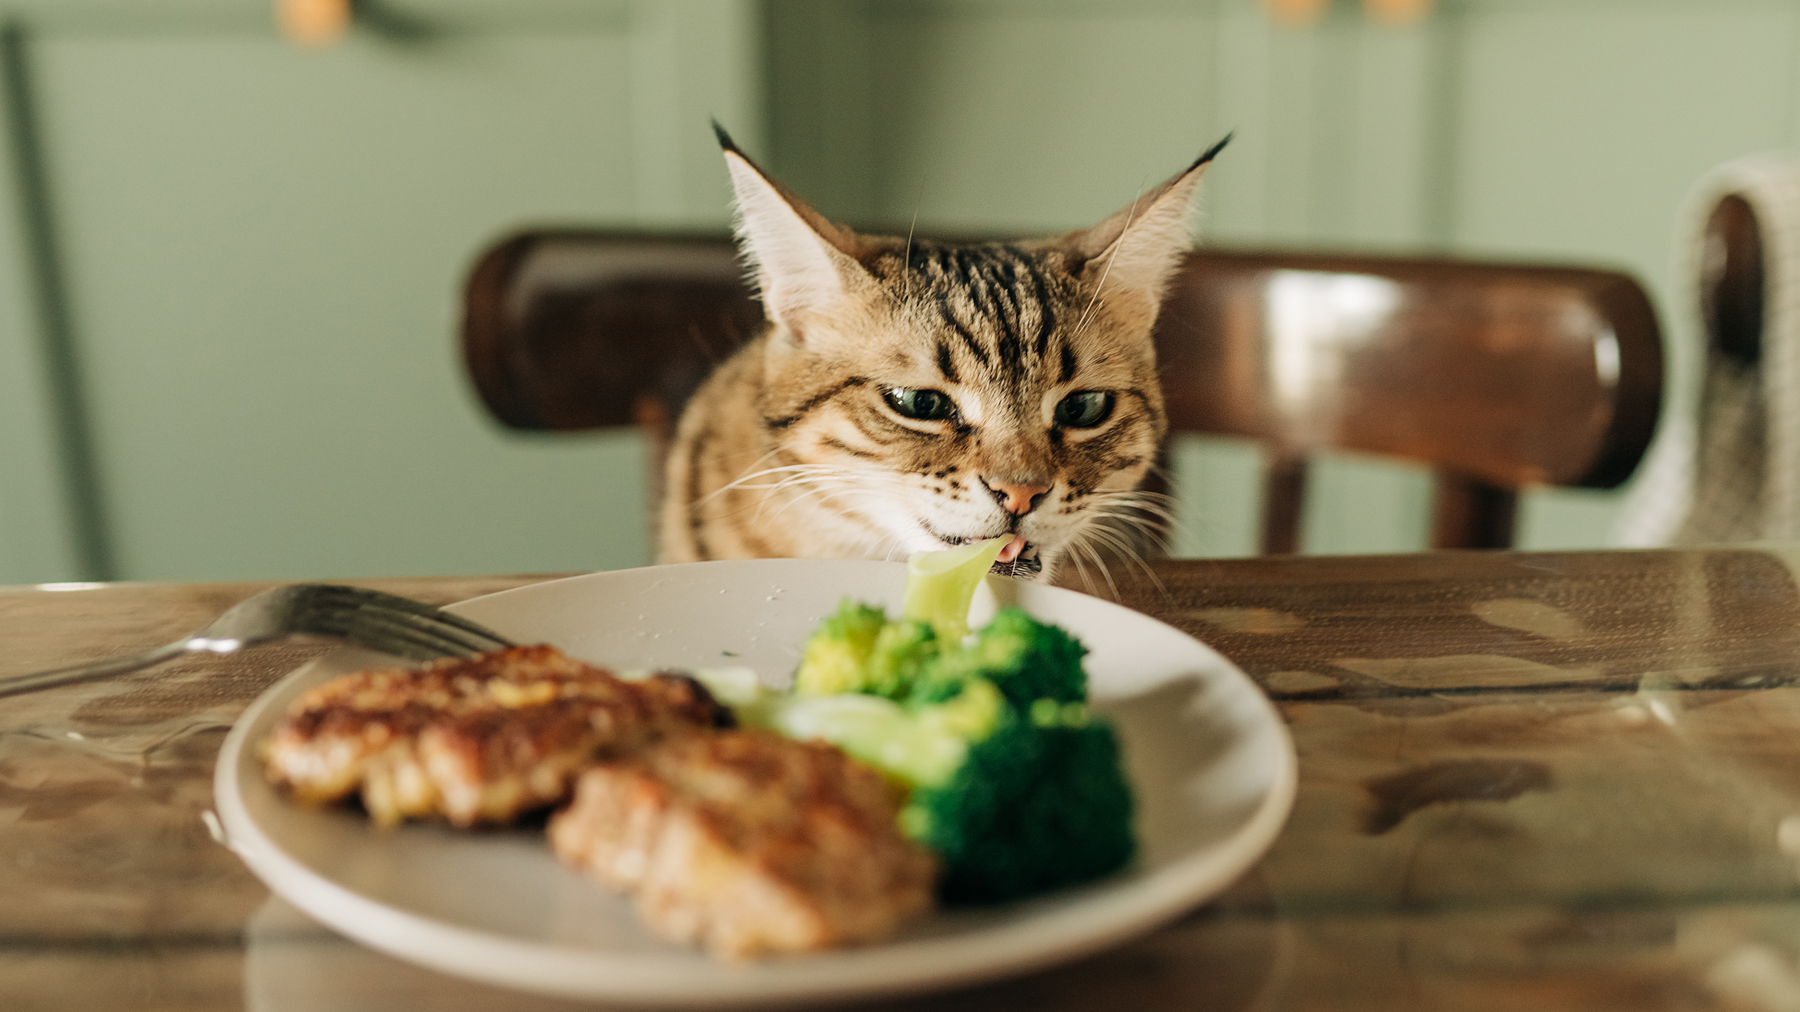 How to Discipline a Cat for Stealing Food?